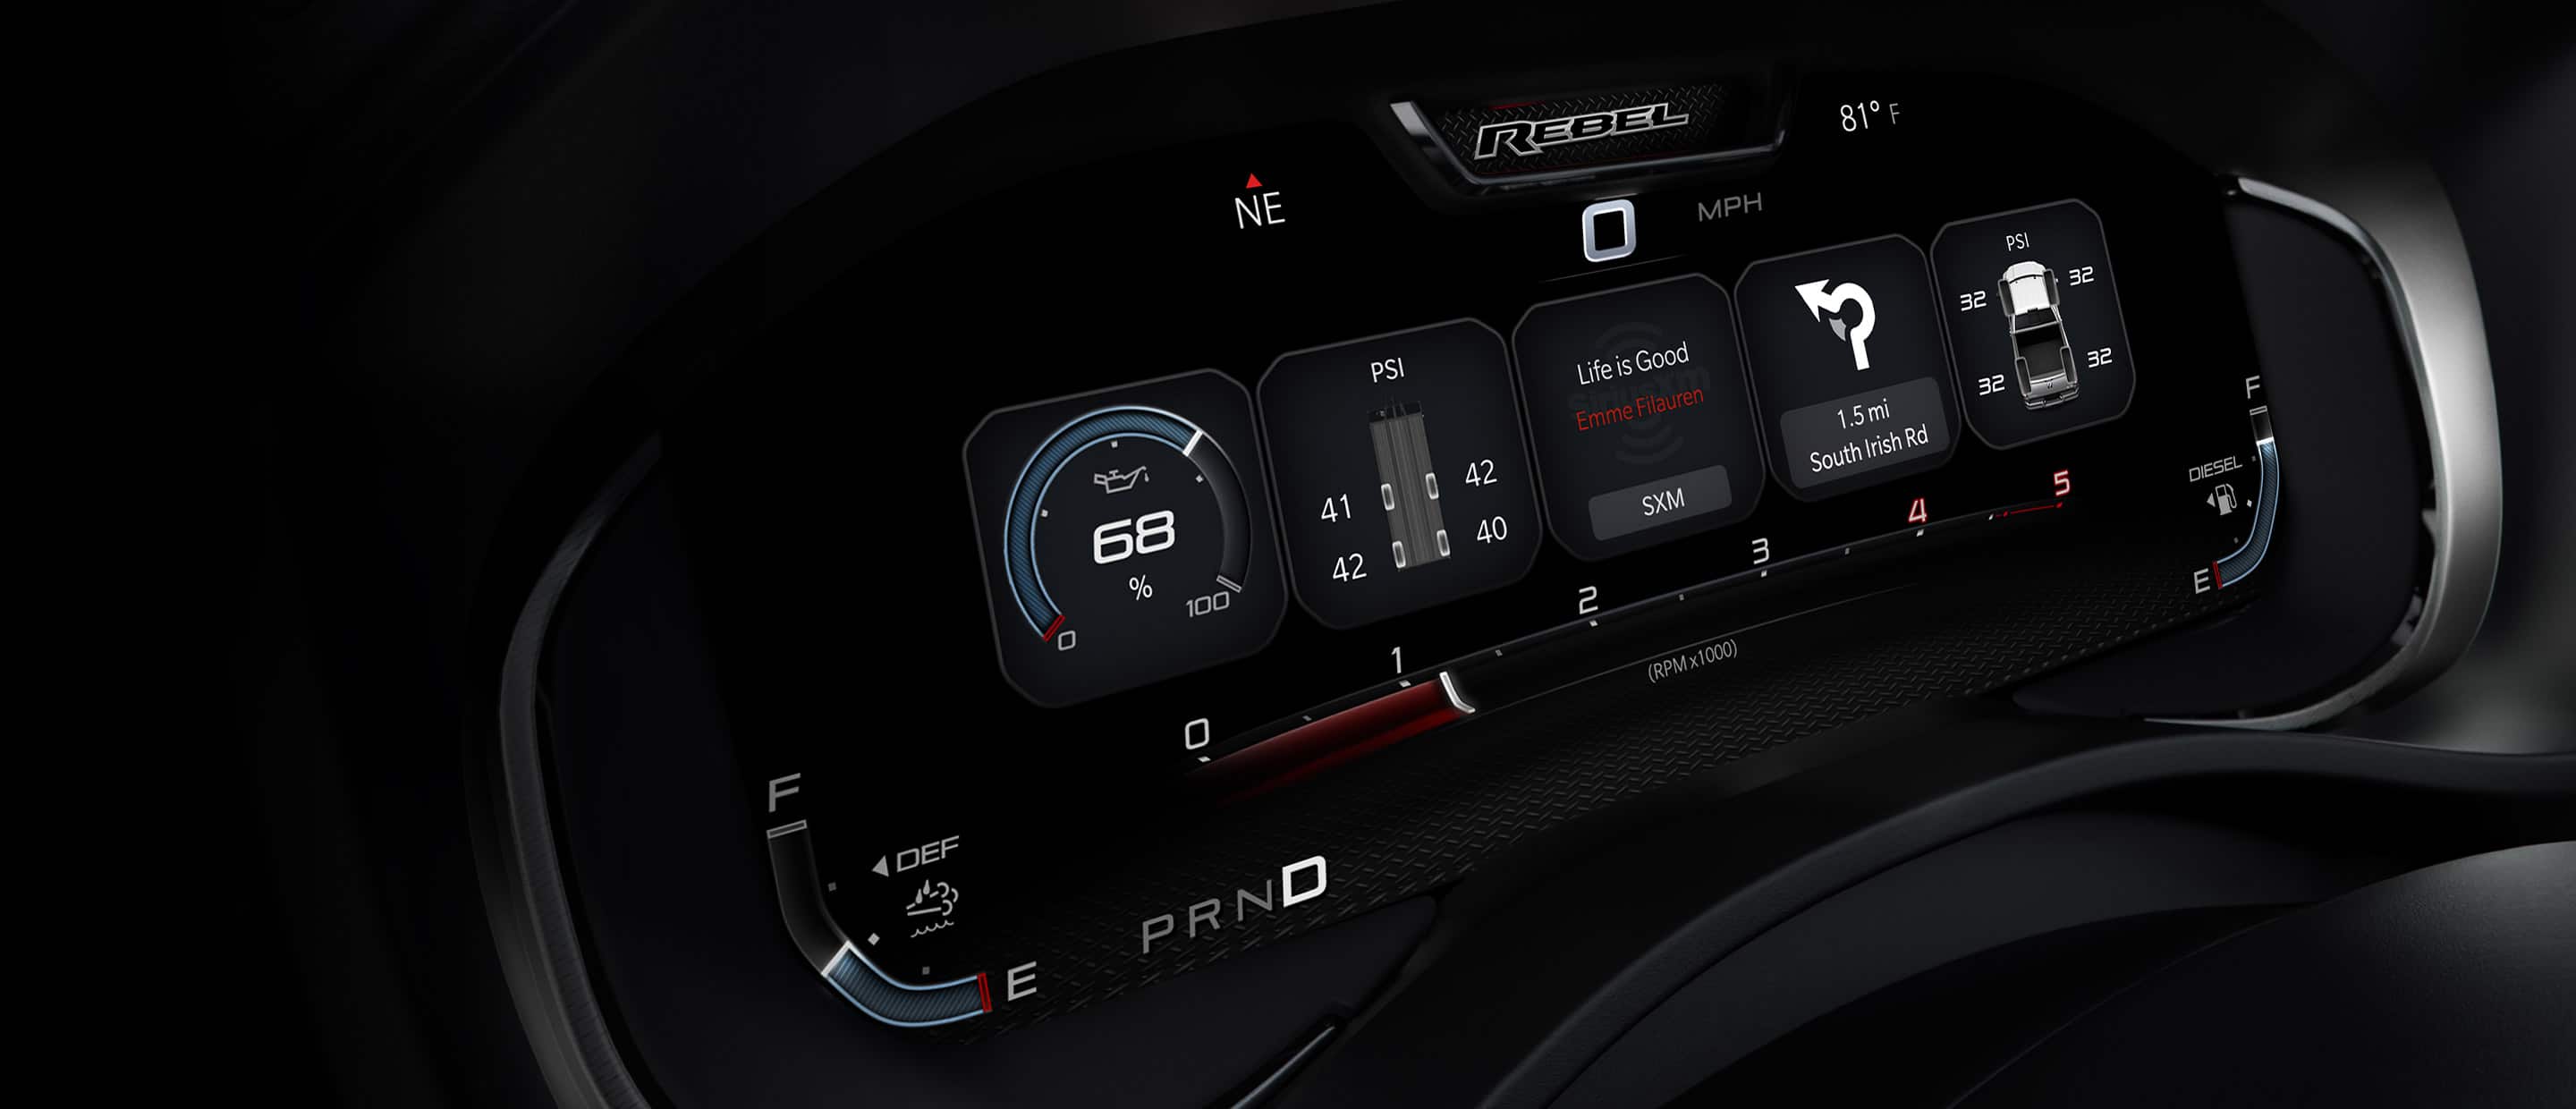 The Driver Information Digital Cluster in the 2023 Ram 2500 Rebel, displaying the fuel level, truck and trailer tire pressure, music selections and navigation directions.